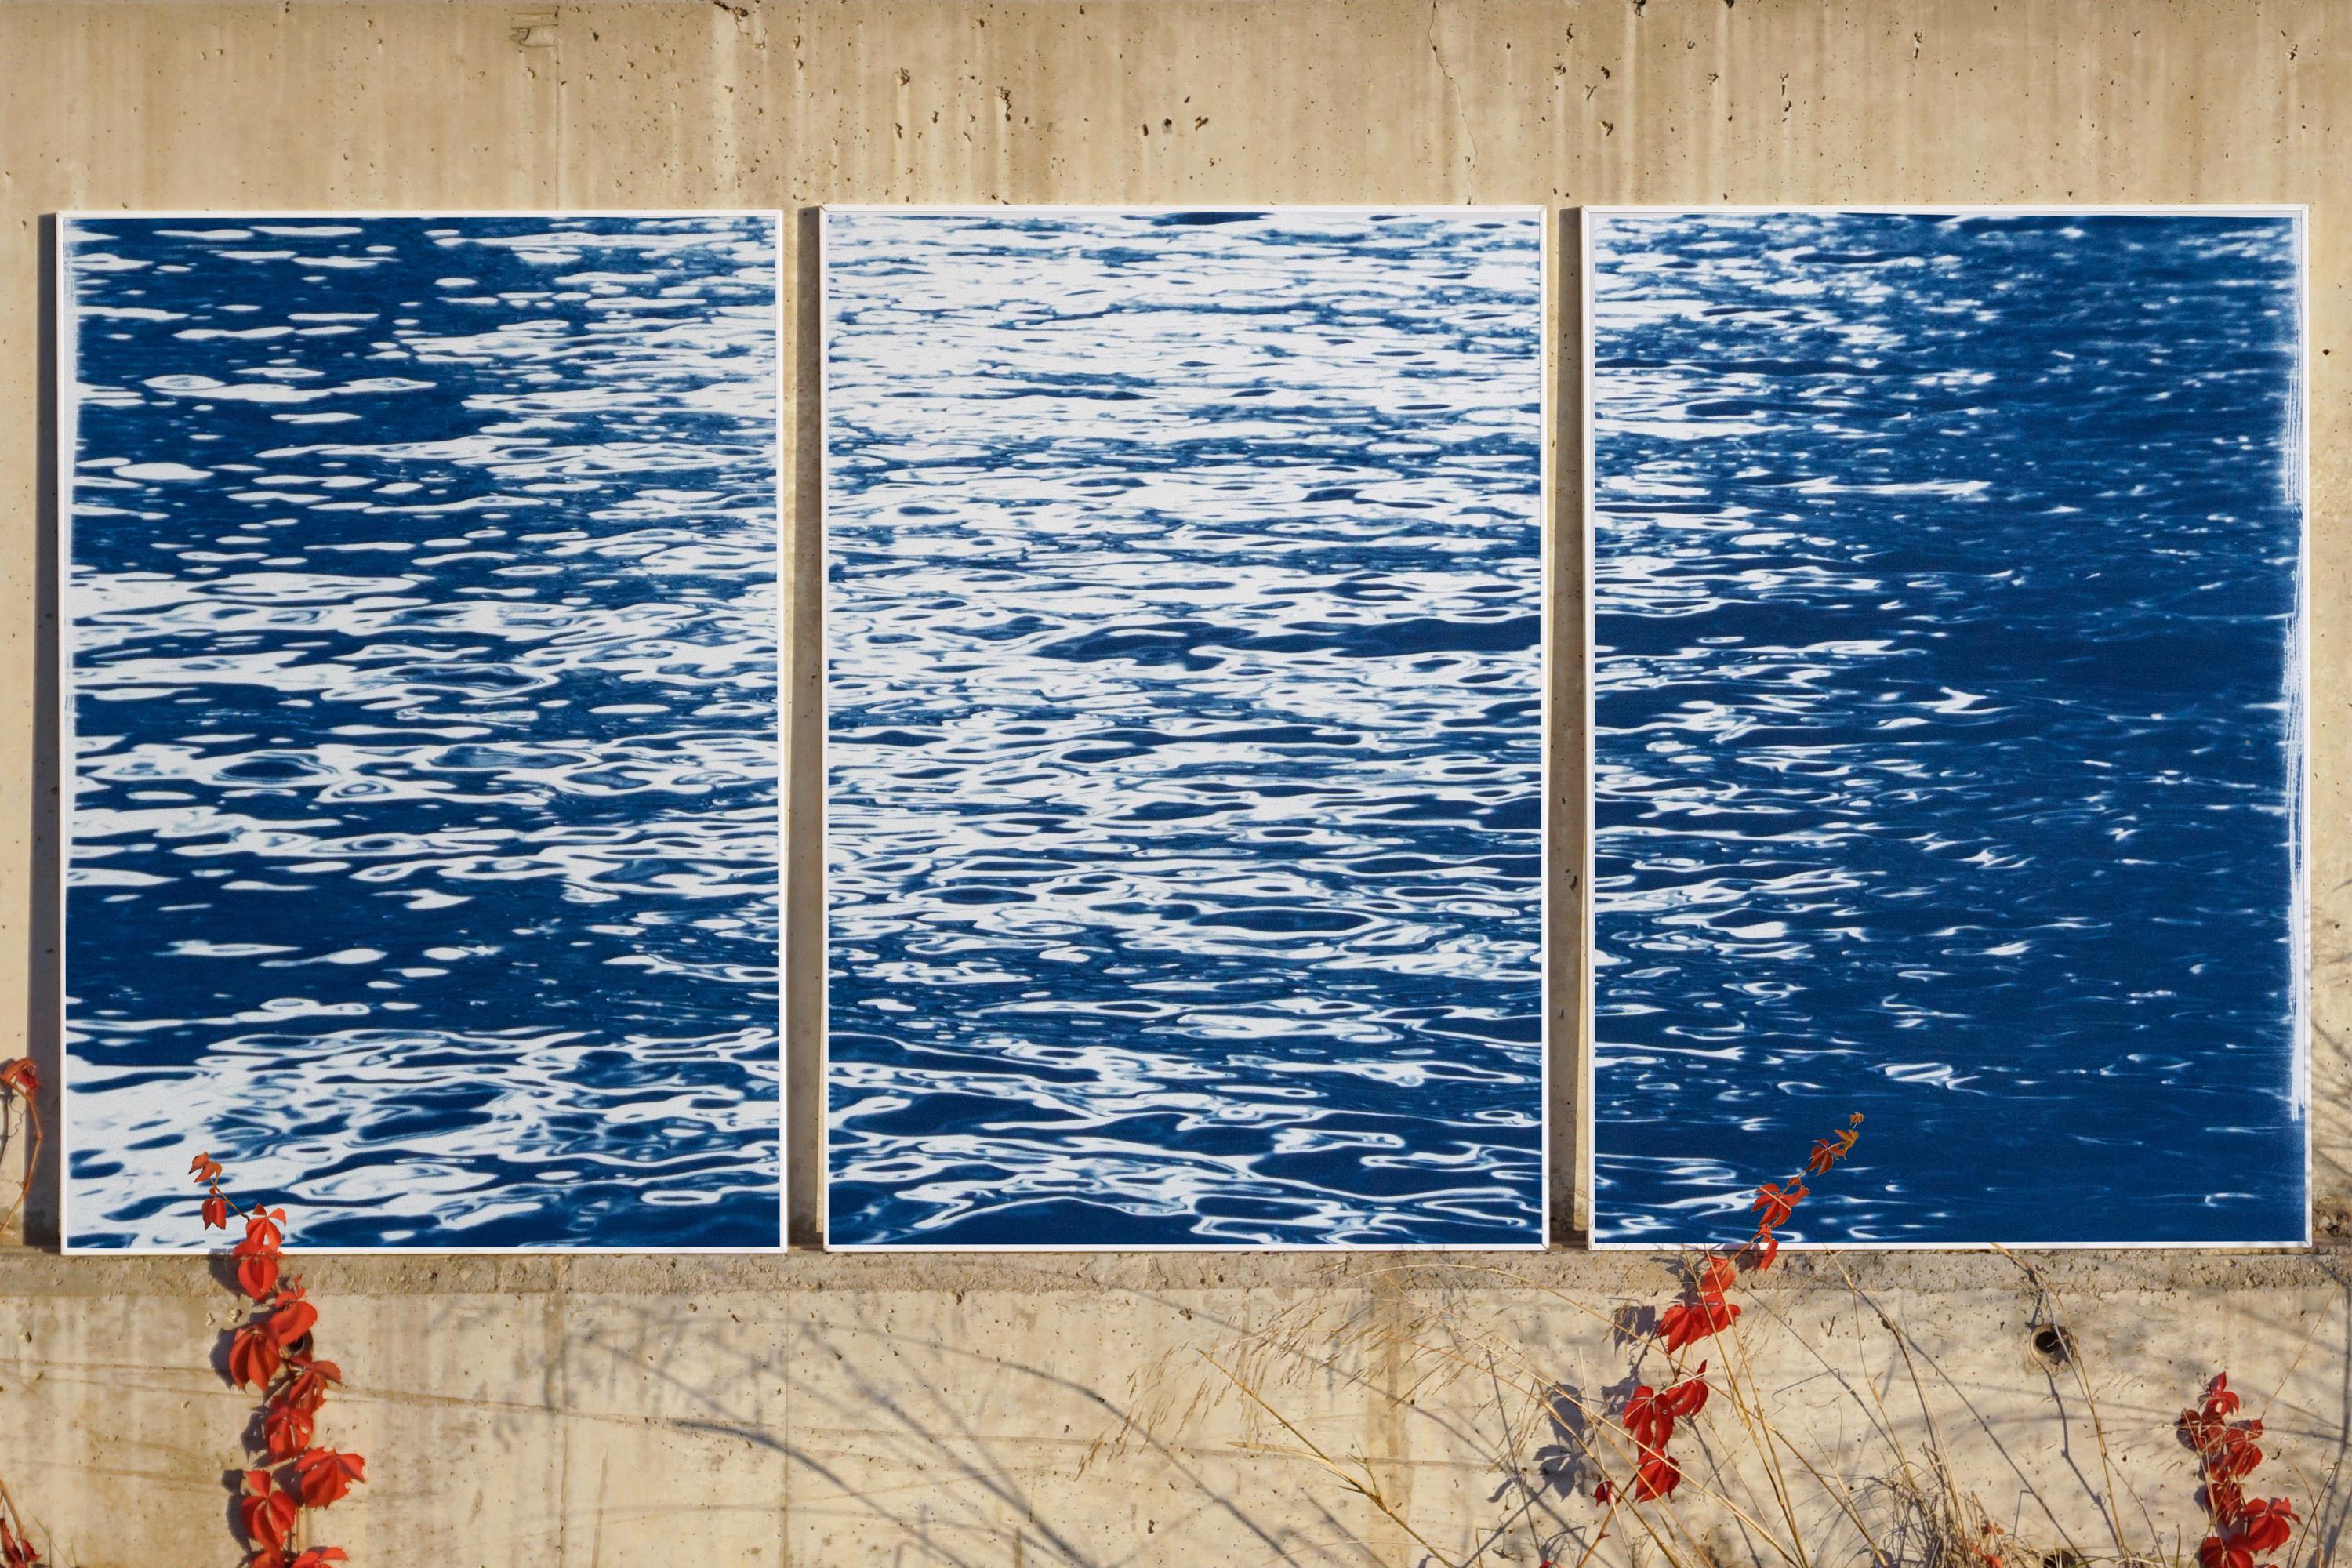 Moonlight Ripples over Lake Como, Nautical Cyanotype Triptych of Moving Water - Photograph by Kind of Cyan